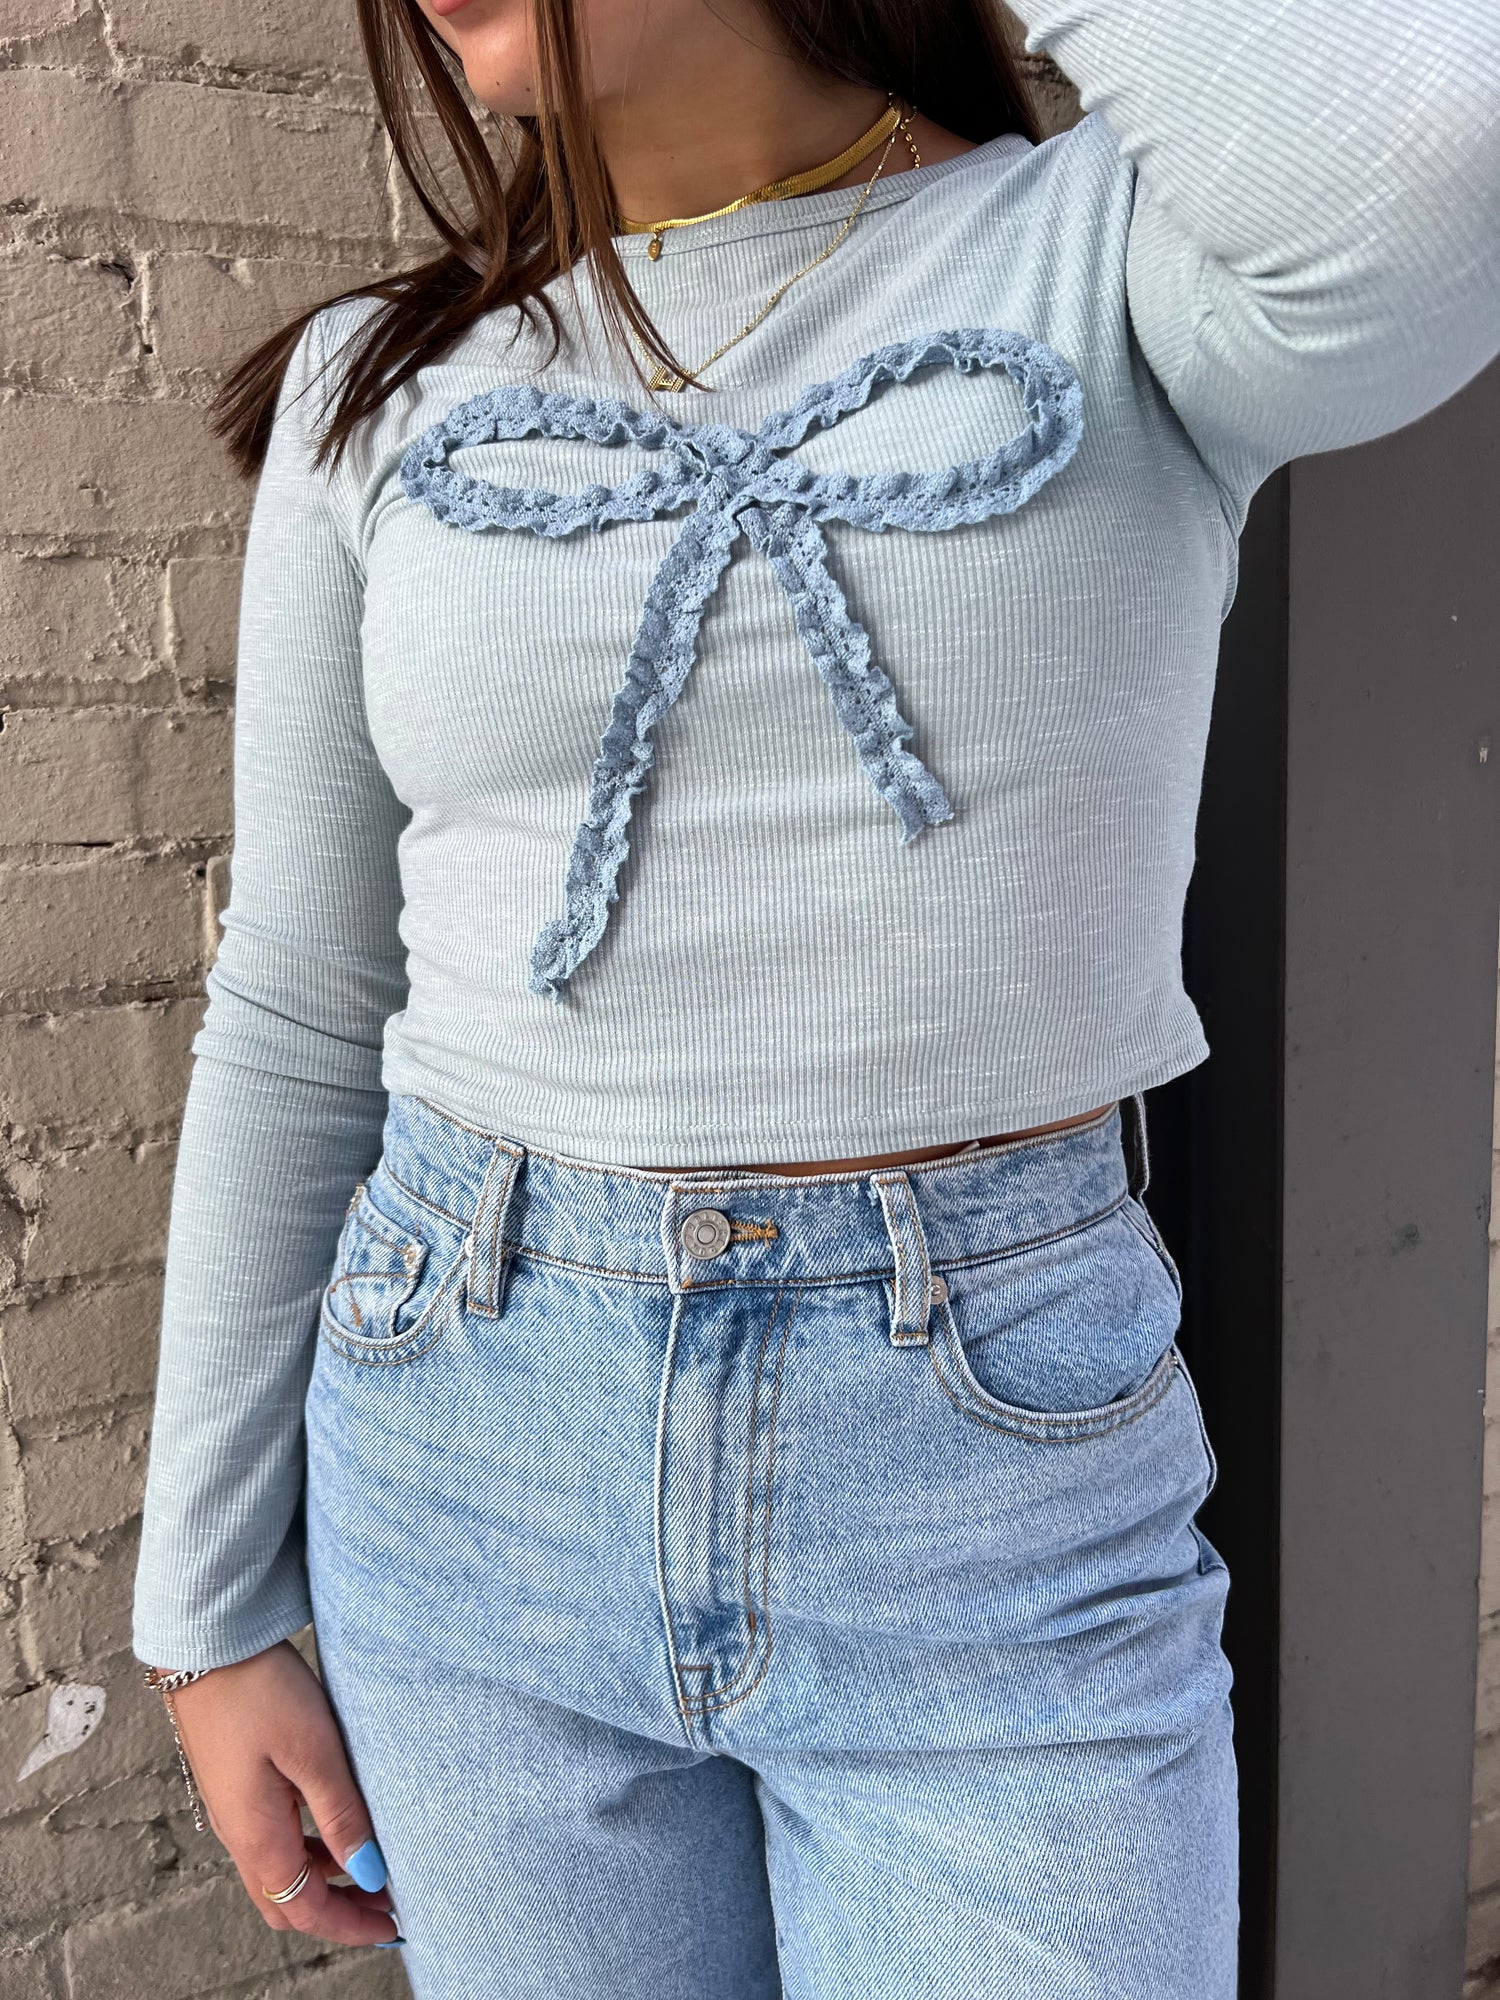 light blue top with crocheted bow